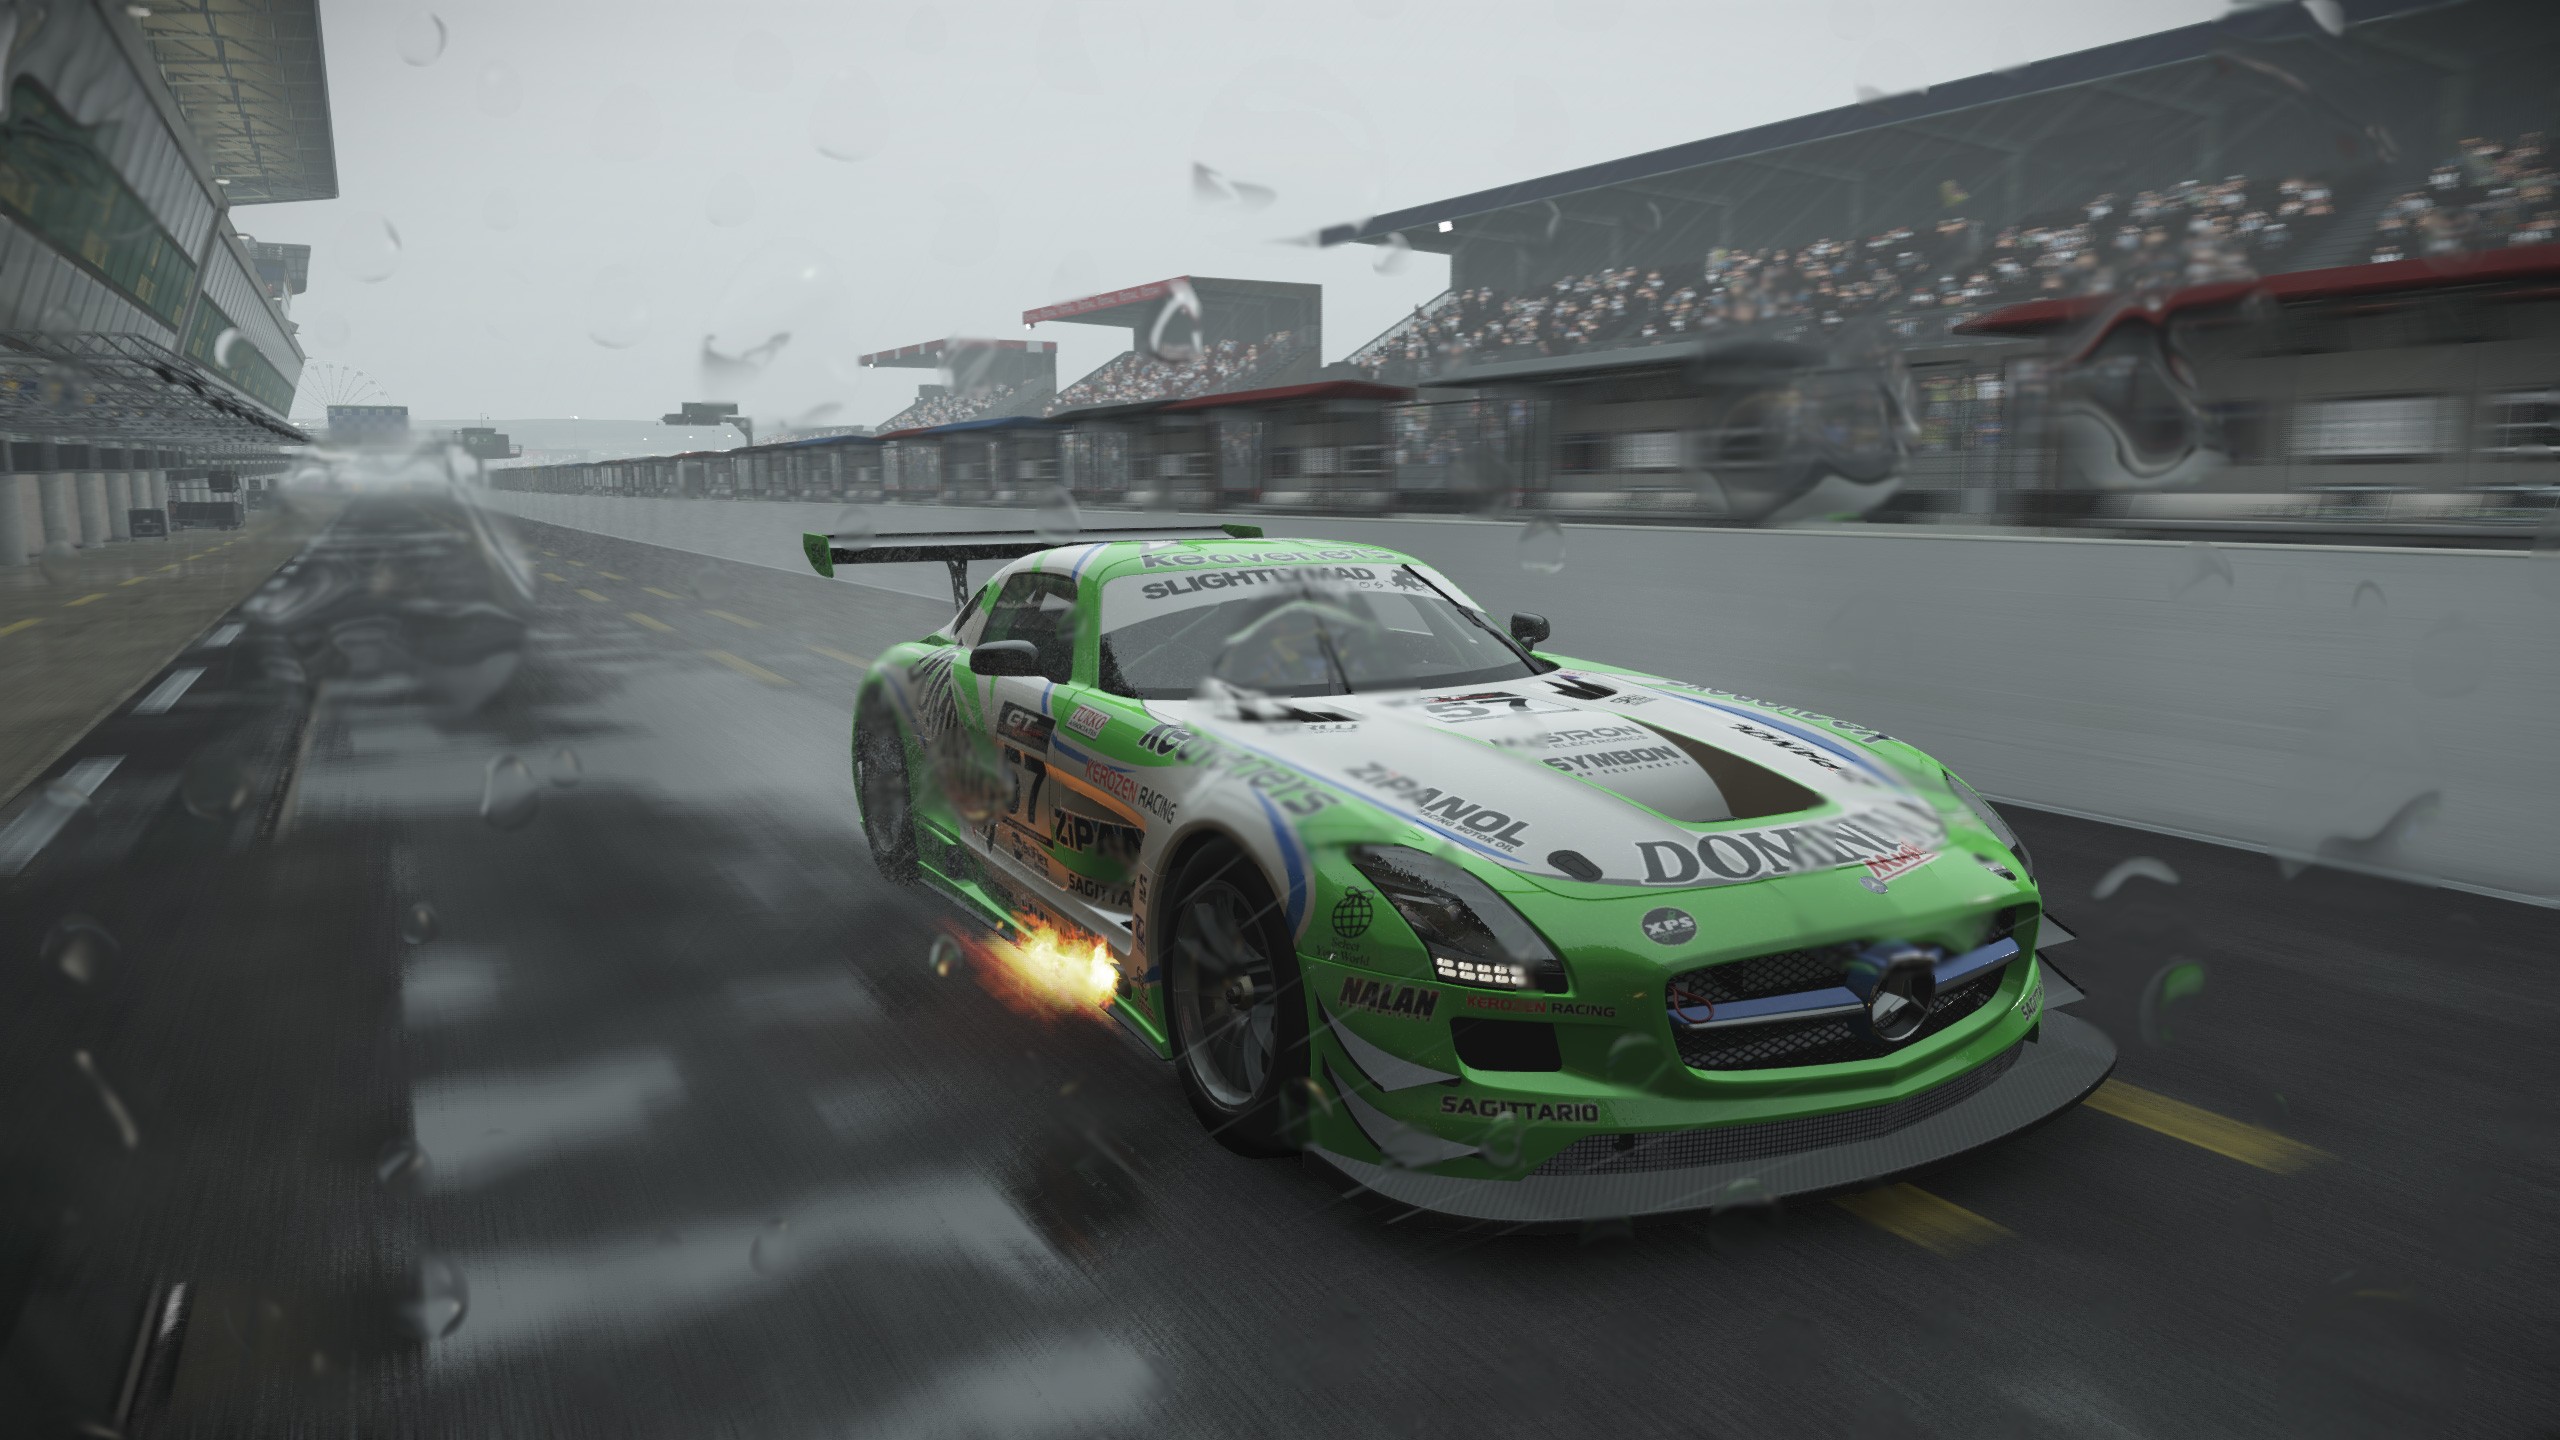 General 2560x1440 Project cars video games PC gaming racing car motorsport green cars